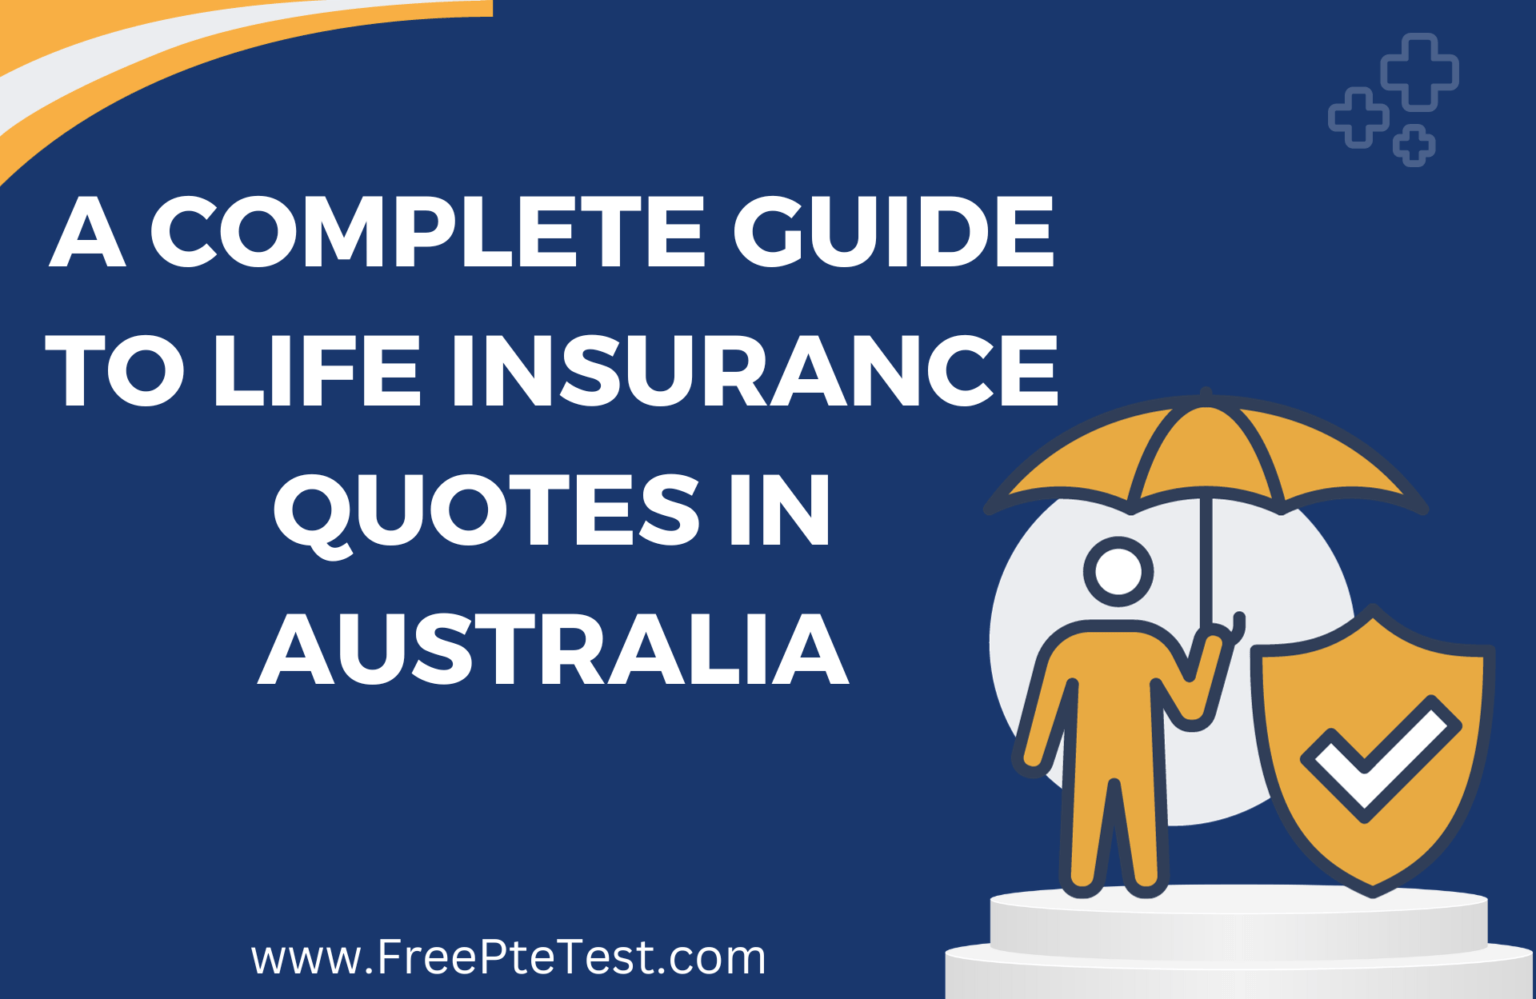 A Complete Guide to Life Insurance Quotes in Australia